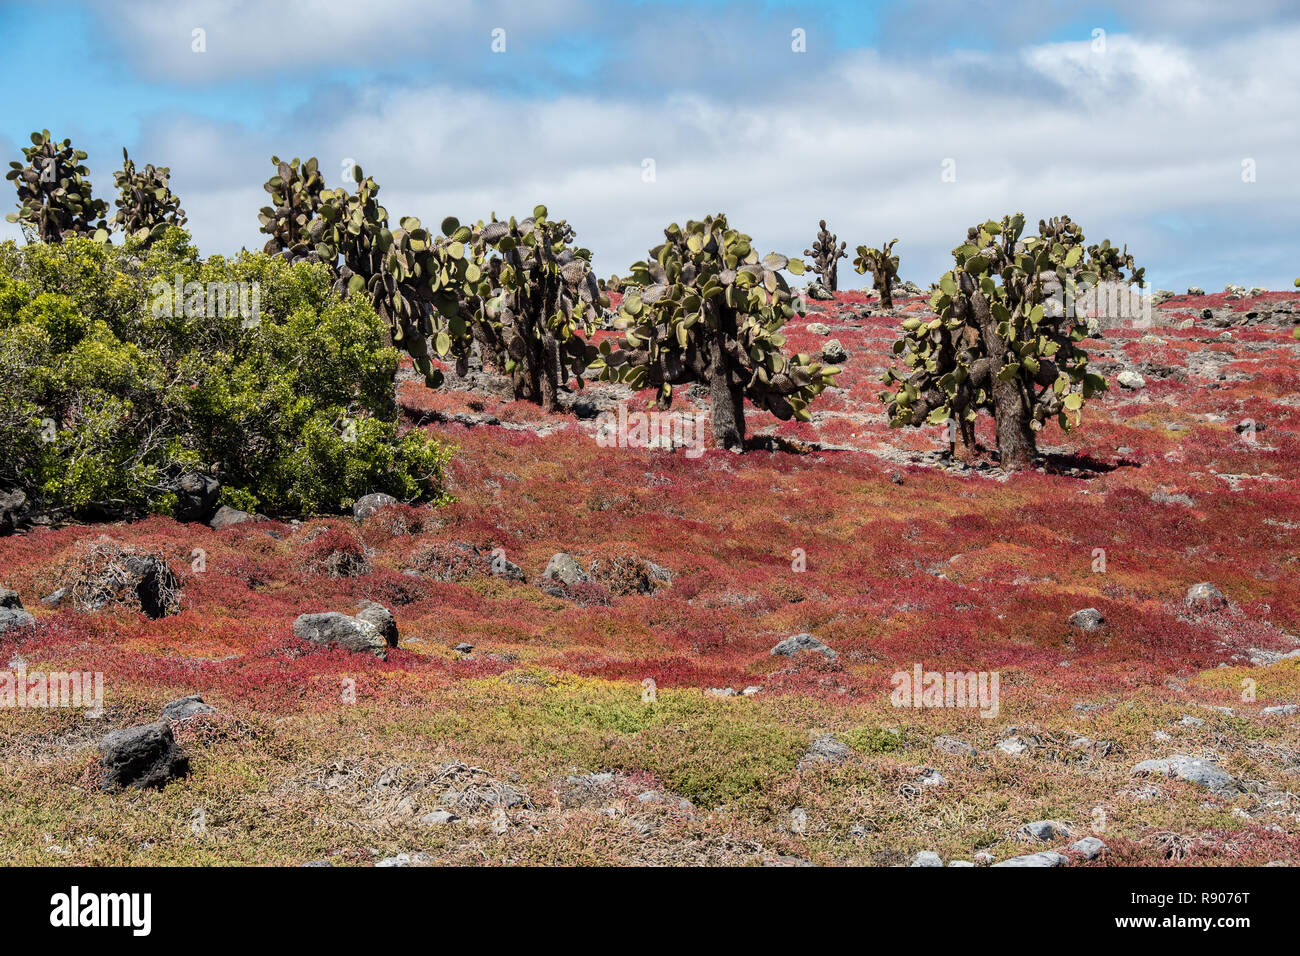 Giant cacti and red sesuvium meadows at the Galapagos Islands Stock Photo